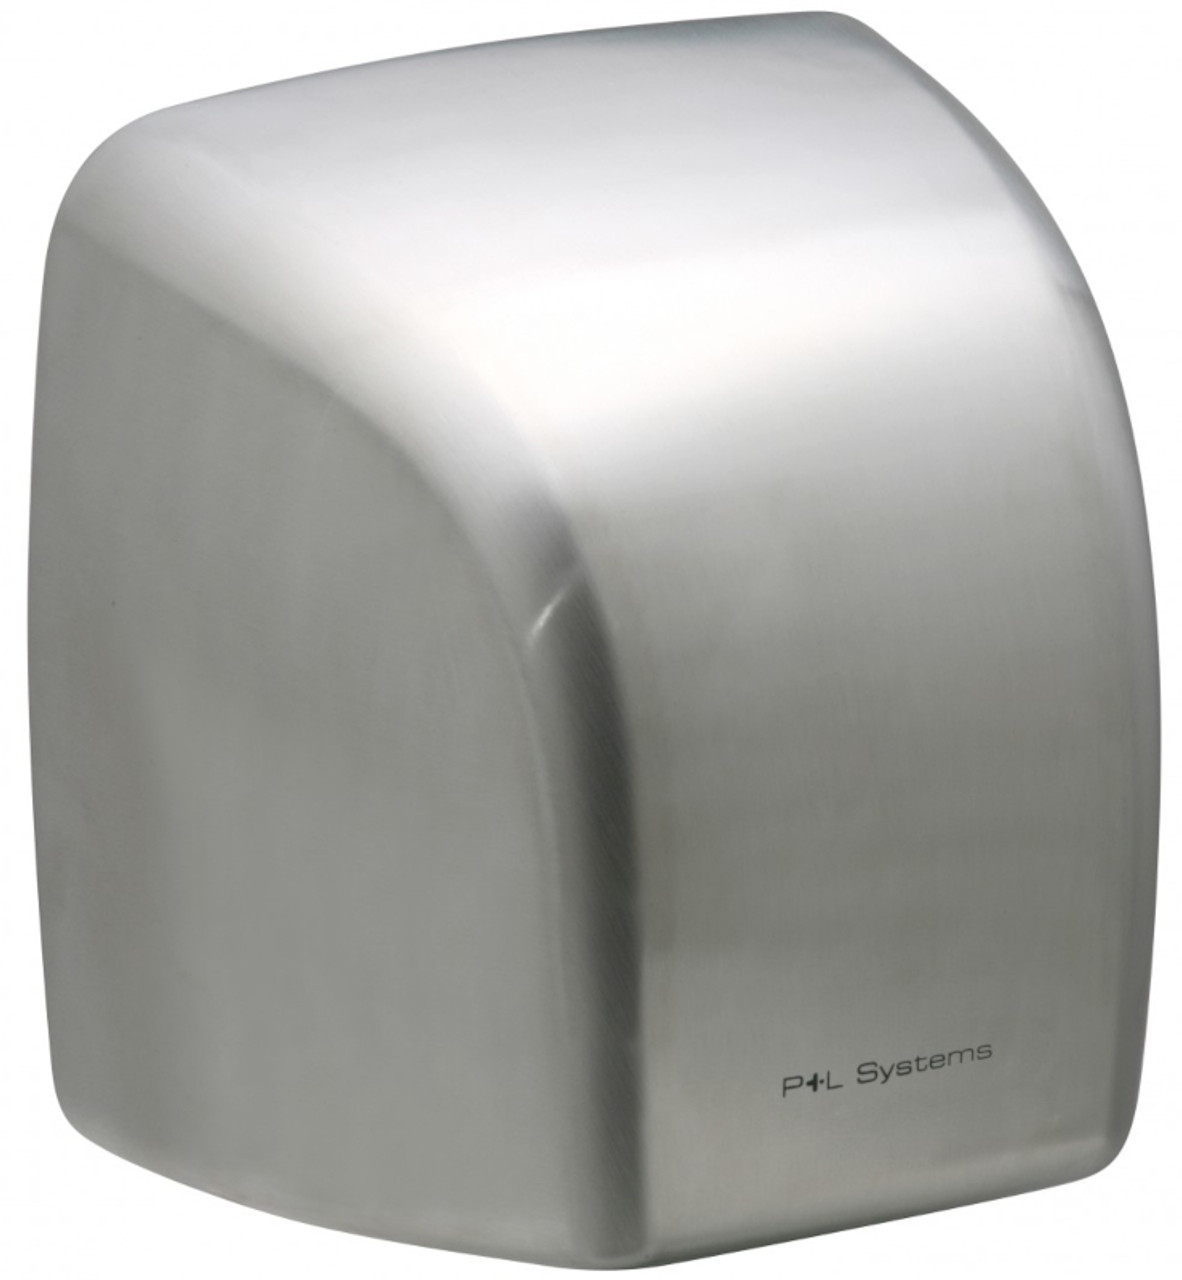 P+L Automatic Hand Dryer - 2100-Watt - Brushed Stainless Steel - DV2100S